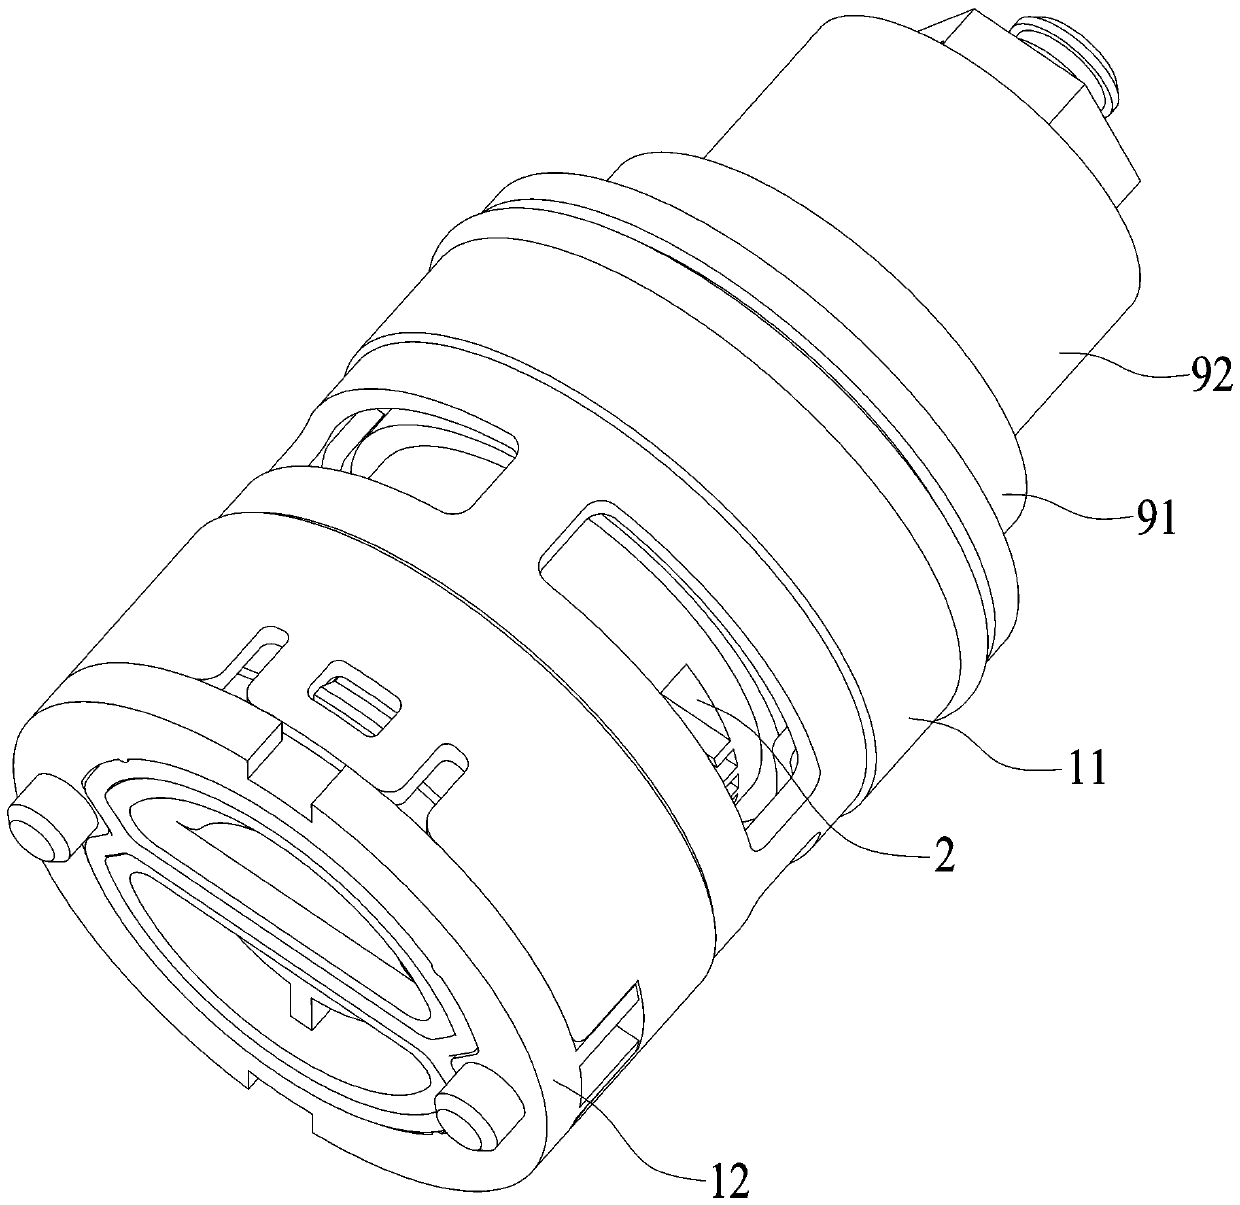 Switch valve with temperature adjusting function